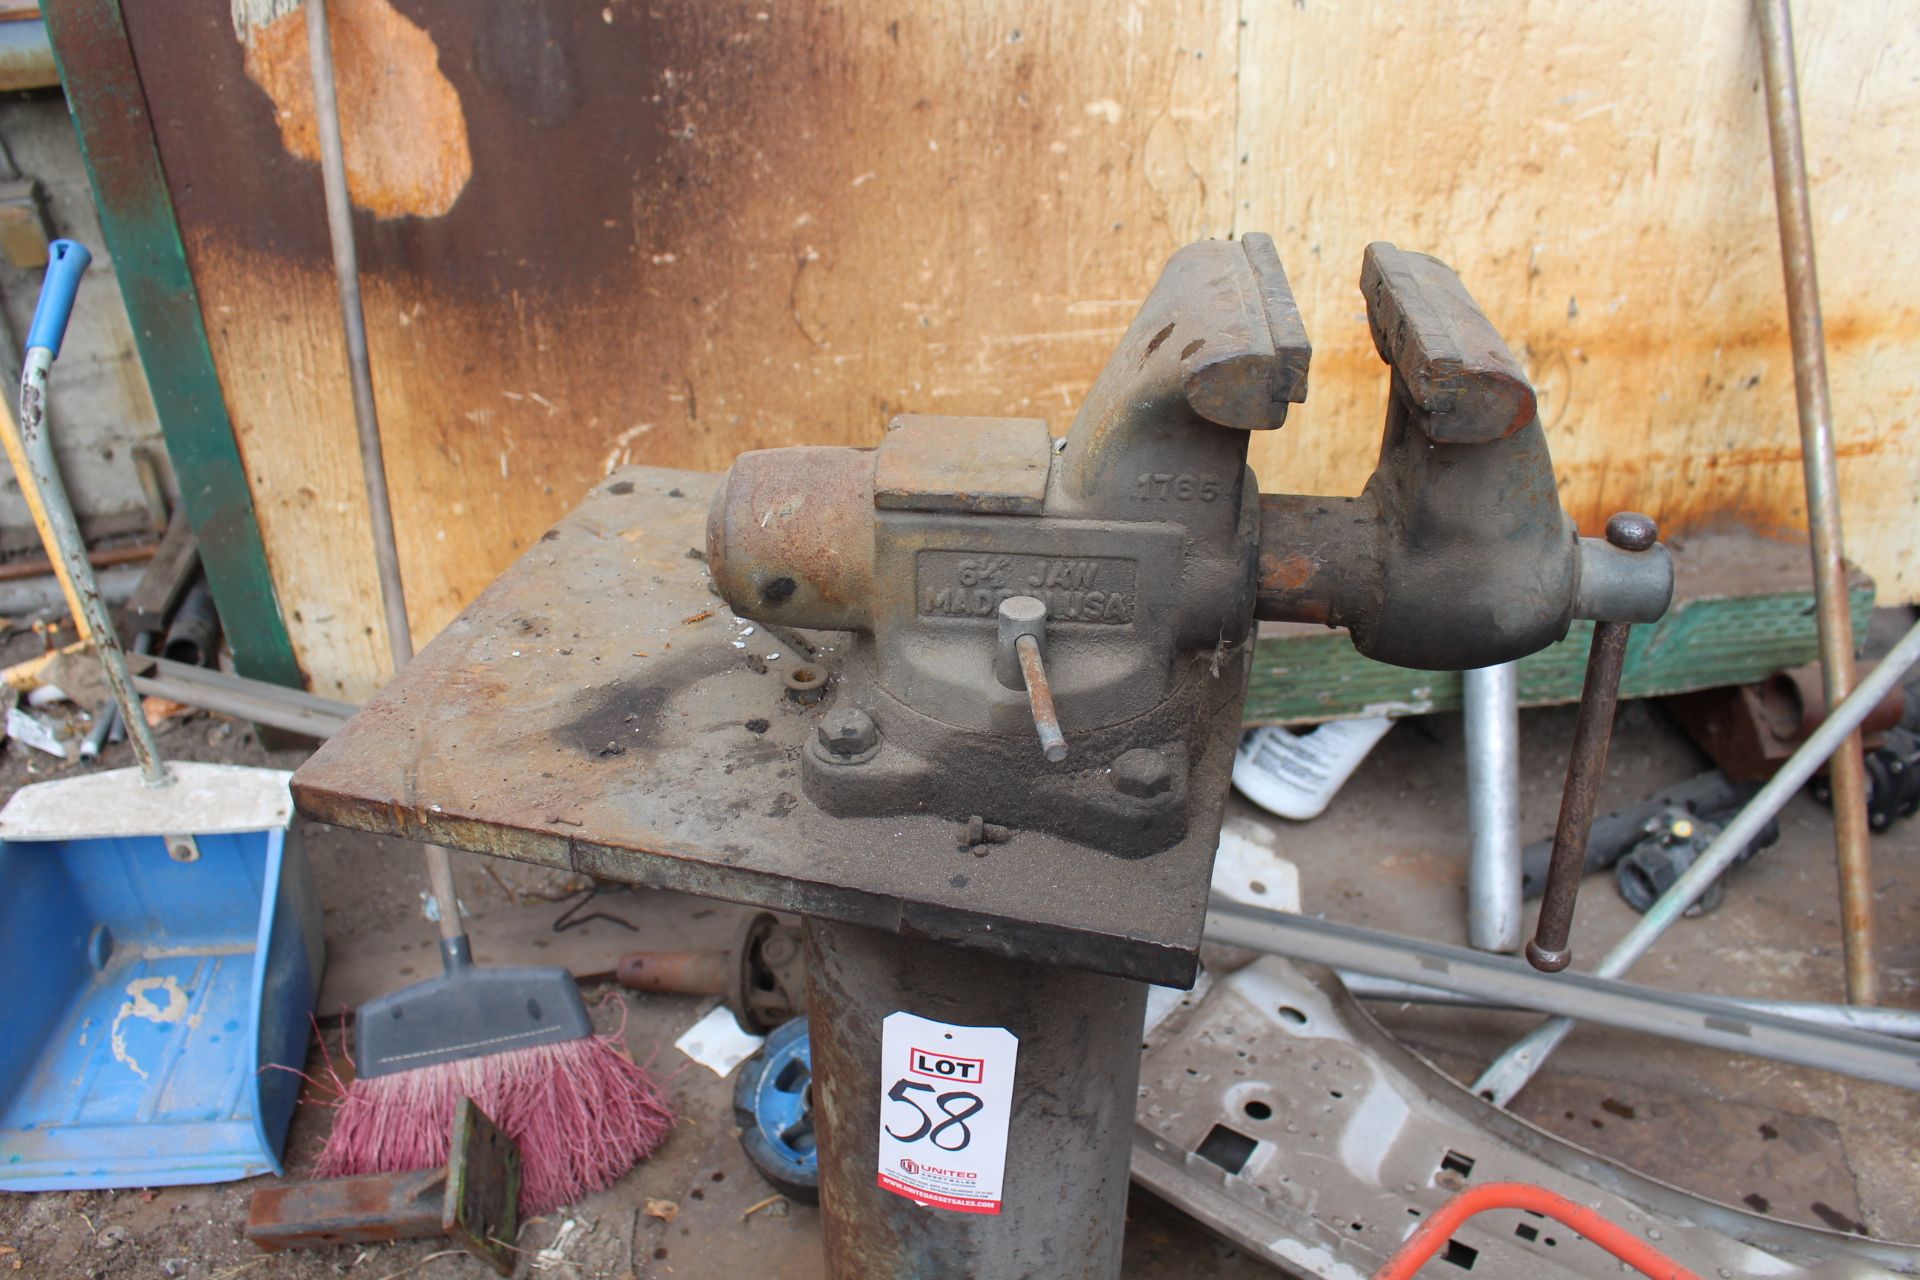 ***VOID*** 6-1/2" BENCH VISE ON HEAVY DUTY STAND